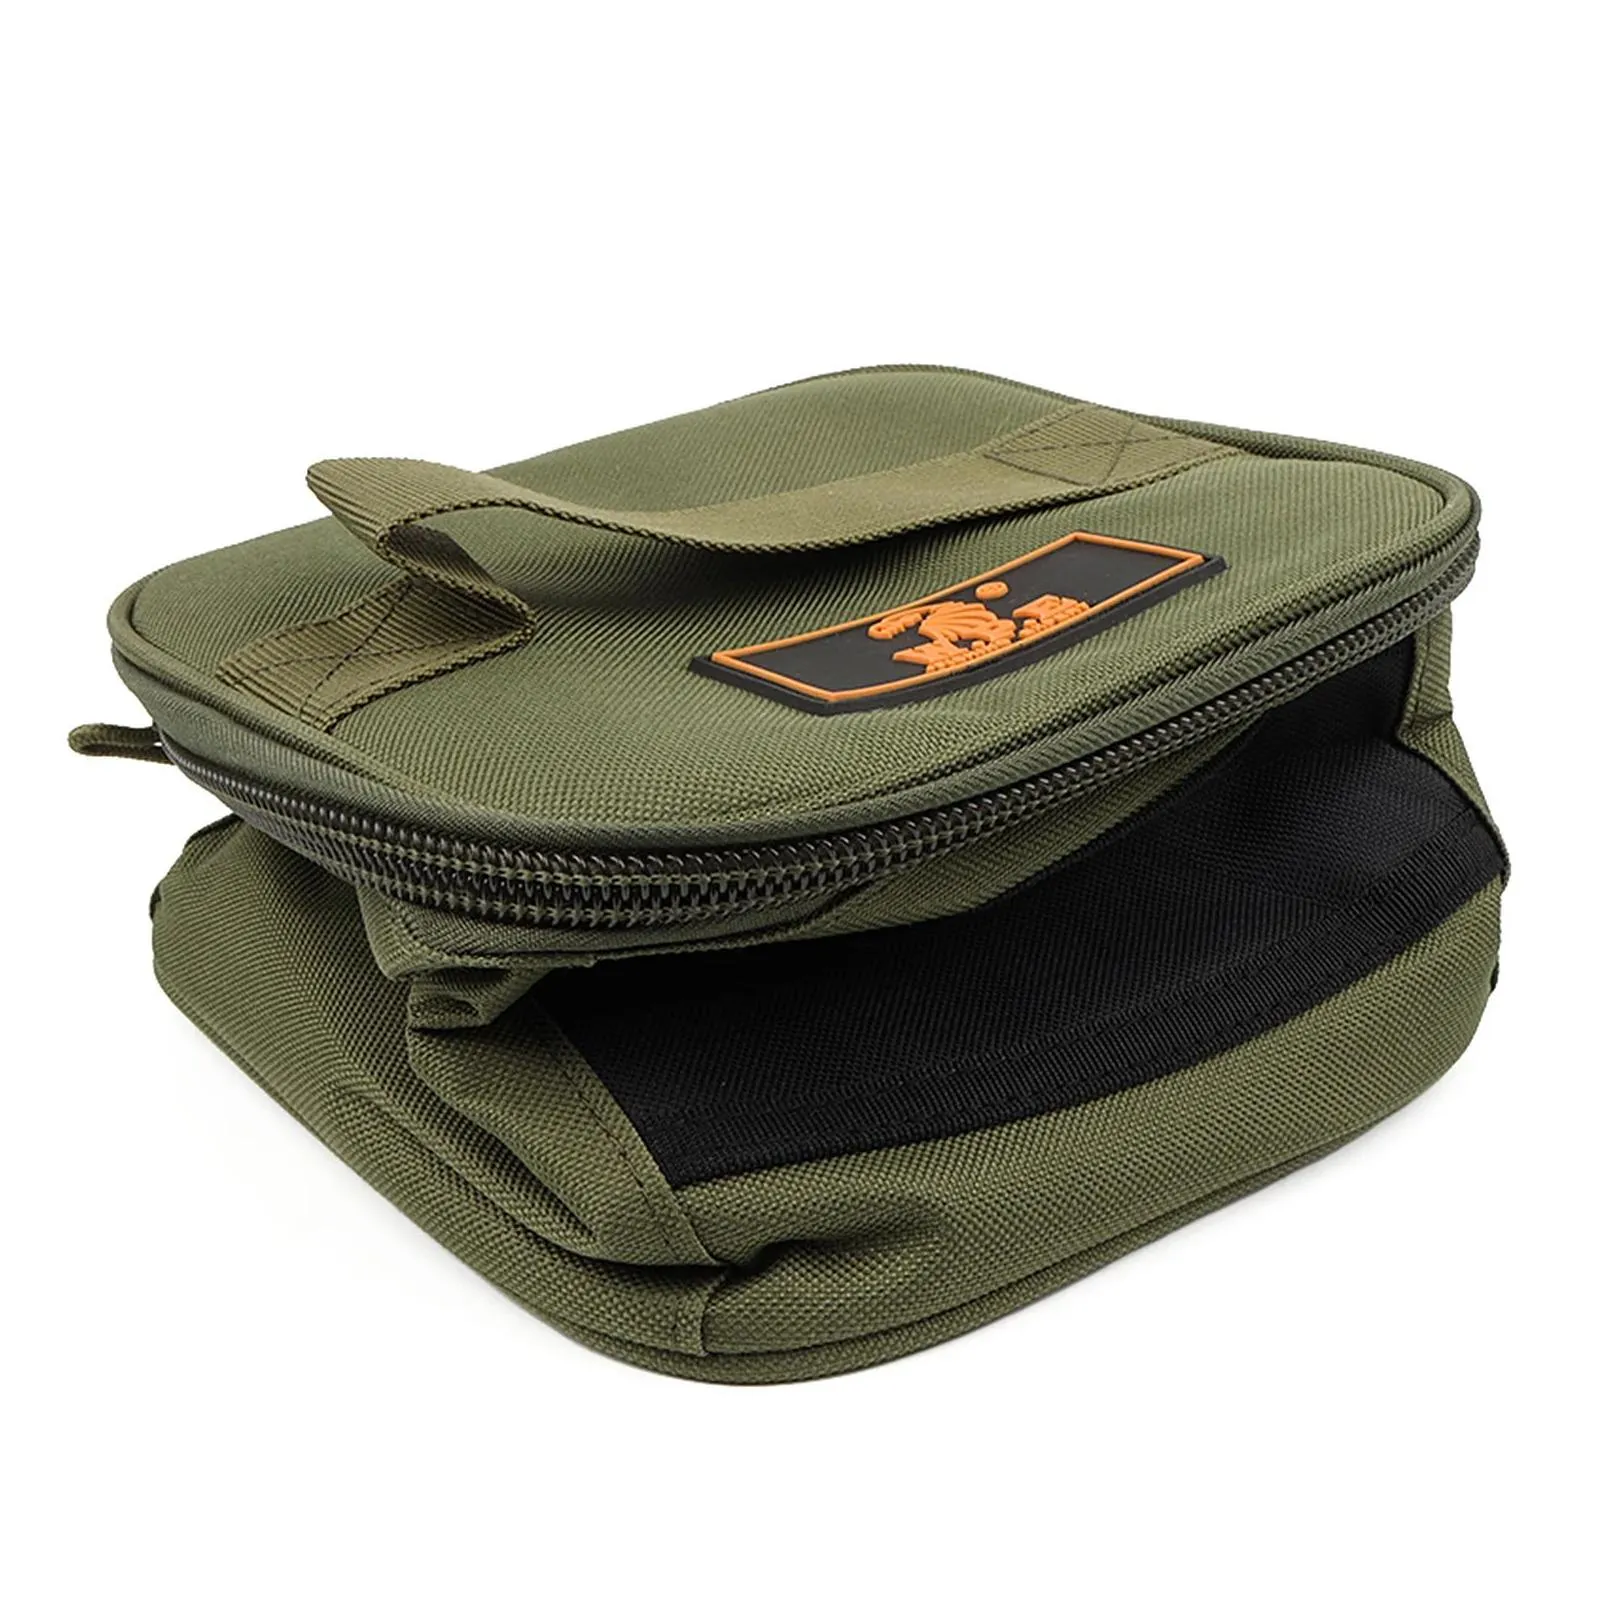 Bags Fishing Reel Storage Bag Carrying Case Oxford Cloth Reel Lure Gear Carrying Case for 50010000 Series Spinning Fishing Reels